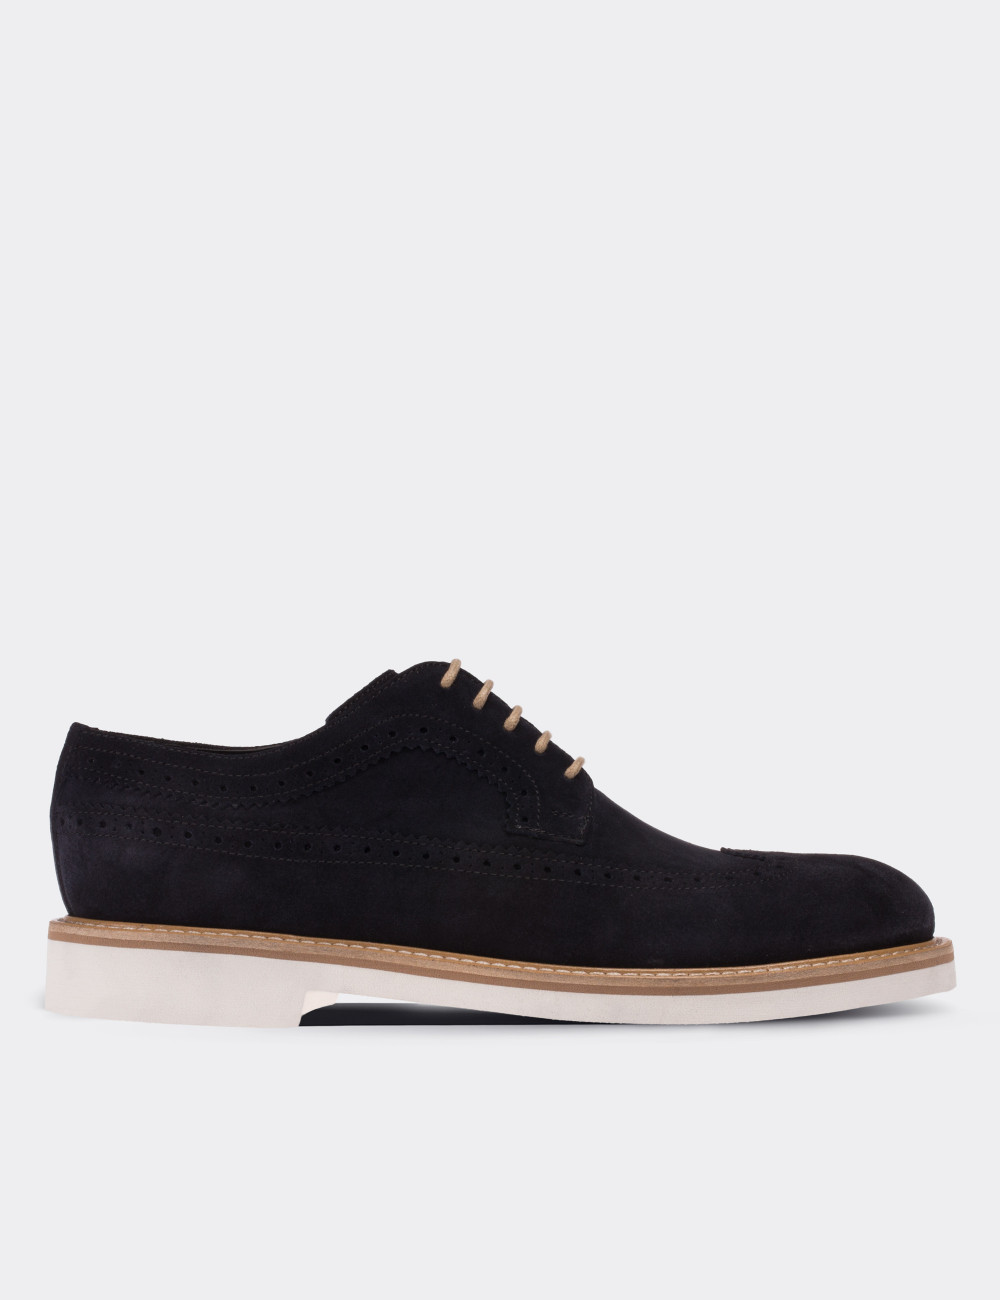 Navy Suede Leather Lace-up Shoes - 01293MLCVE25